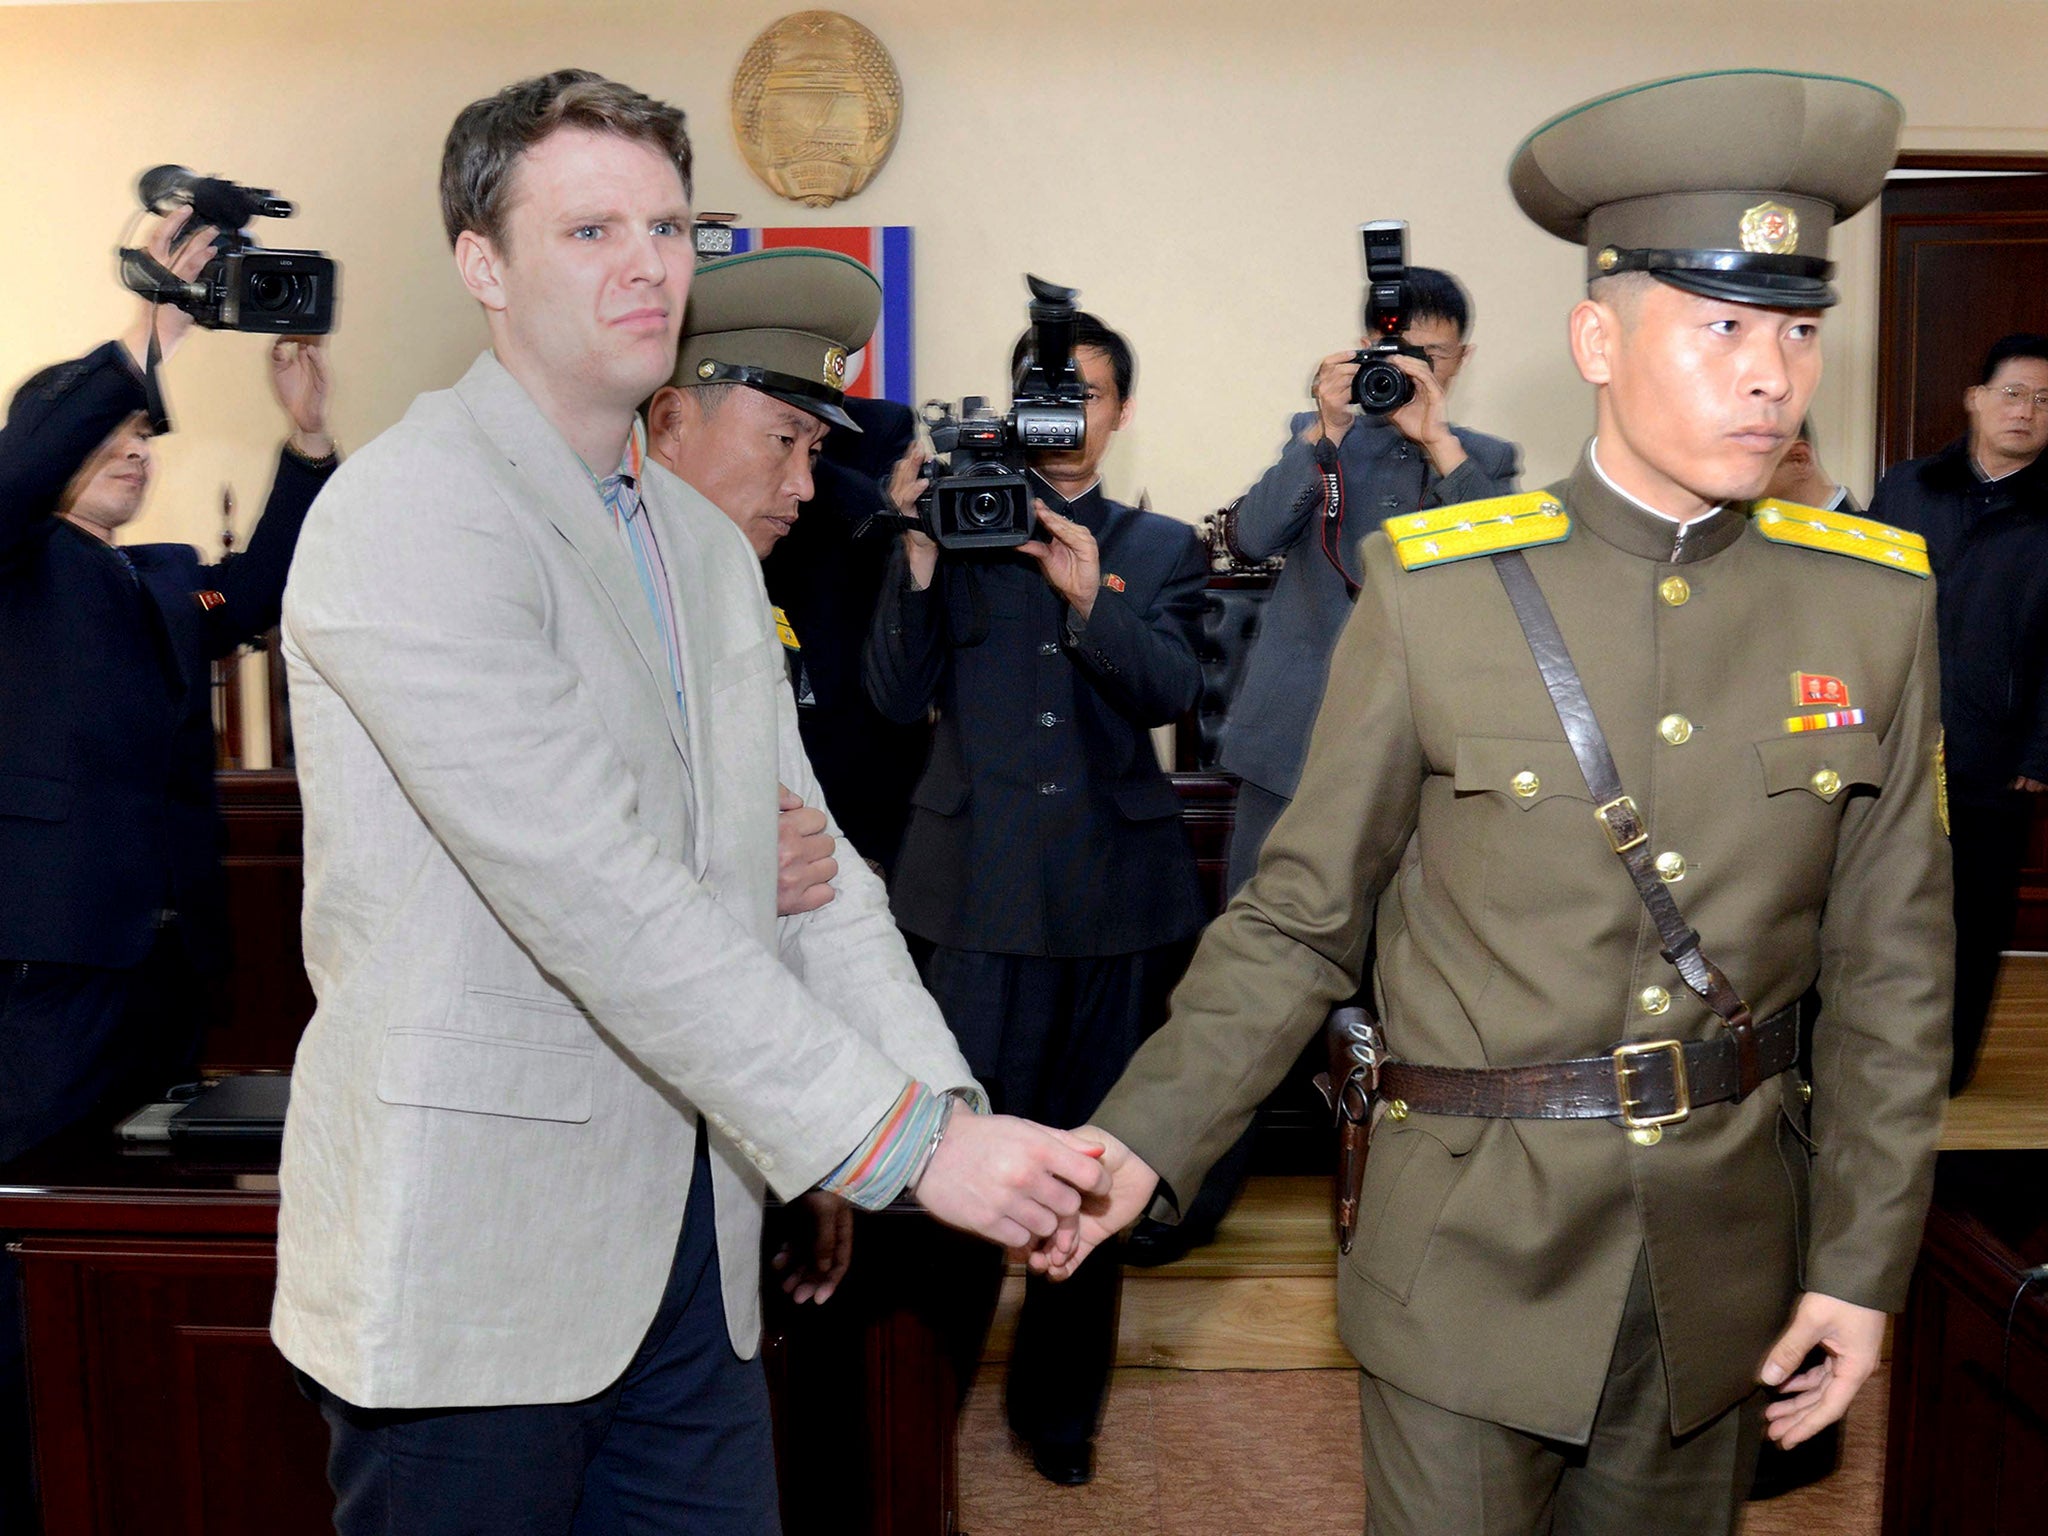 &#13;
Otto Warmbier (left) died a few days after returning from North Korea to the US &#13;